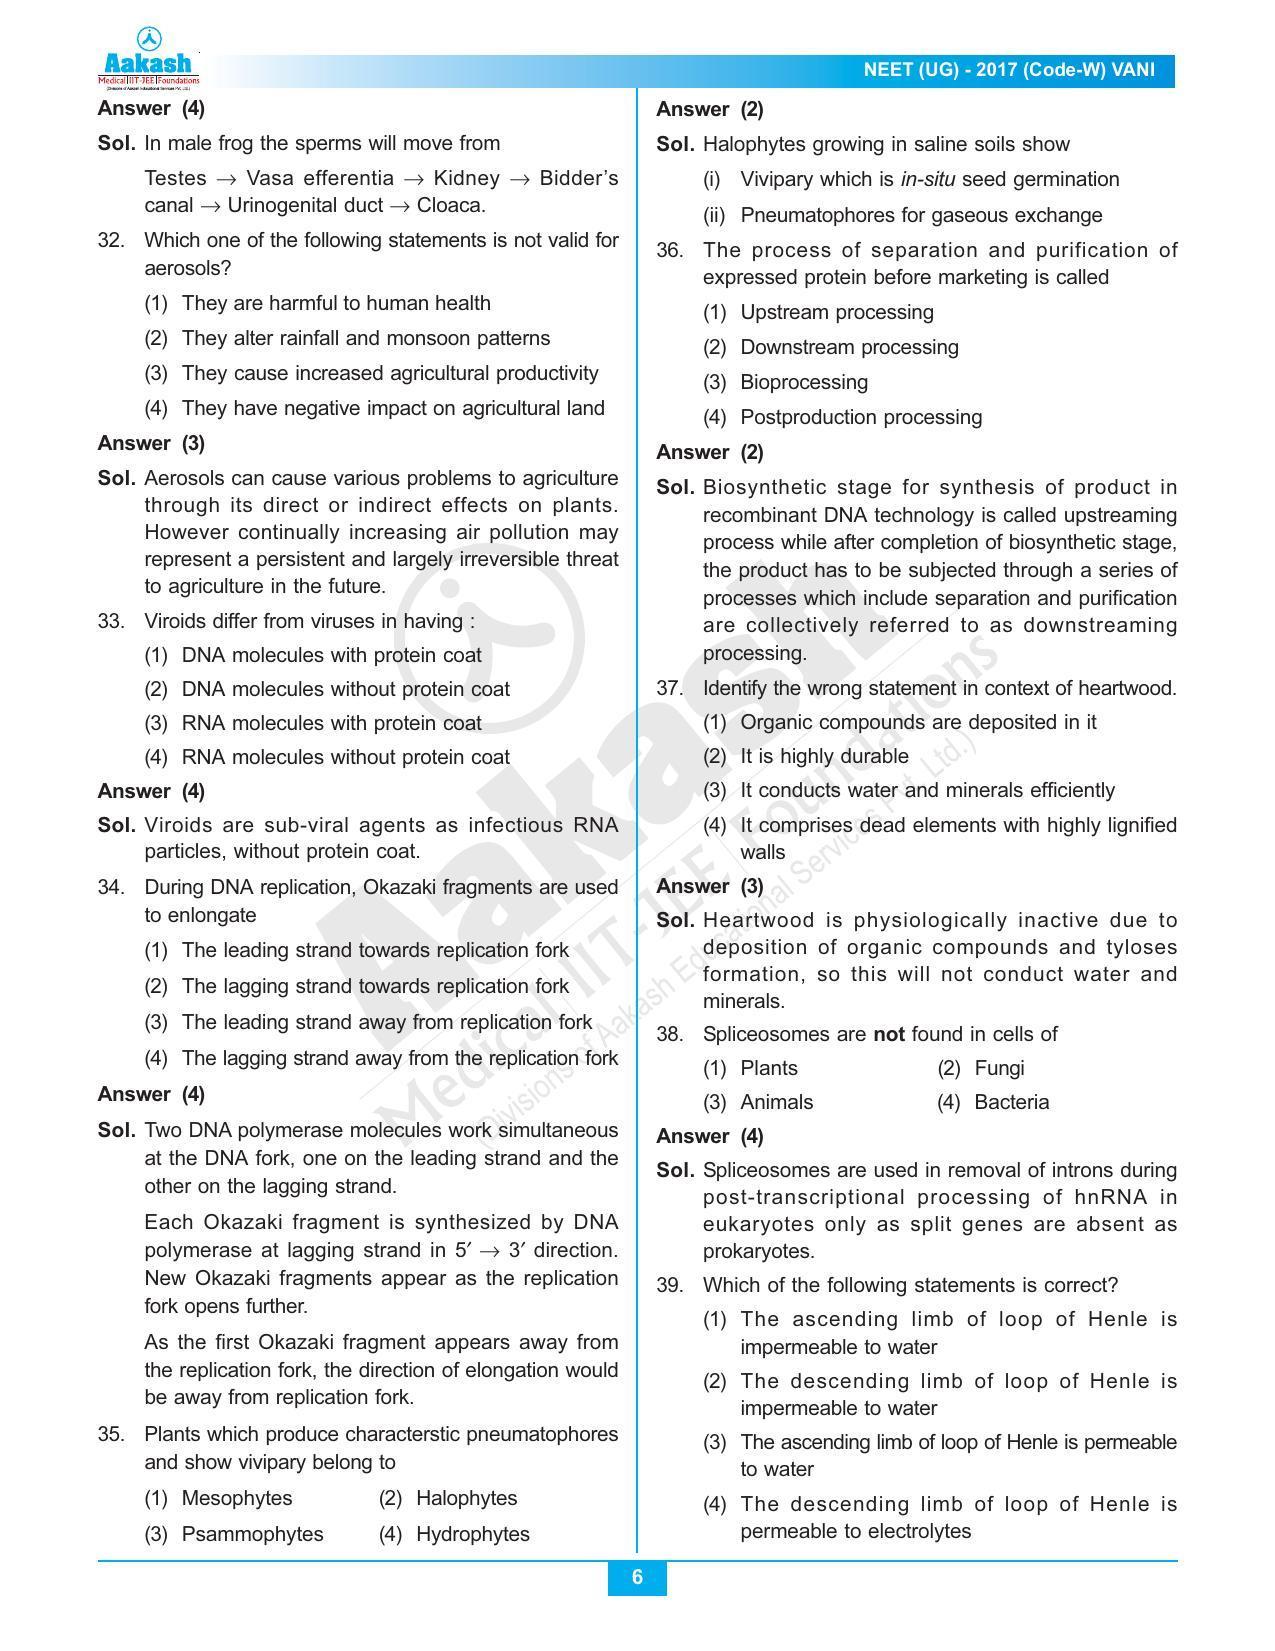  NEET Code W 2017 Answer & Solutions - Page 6